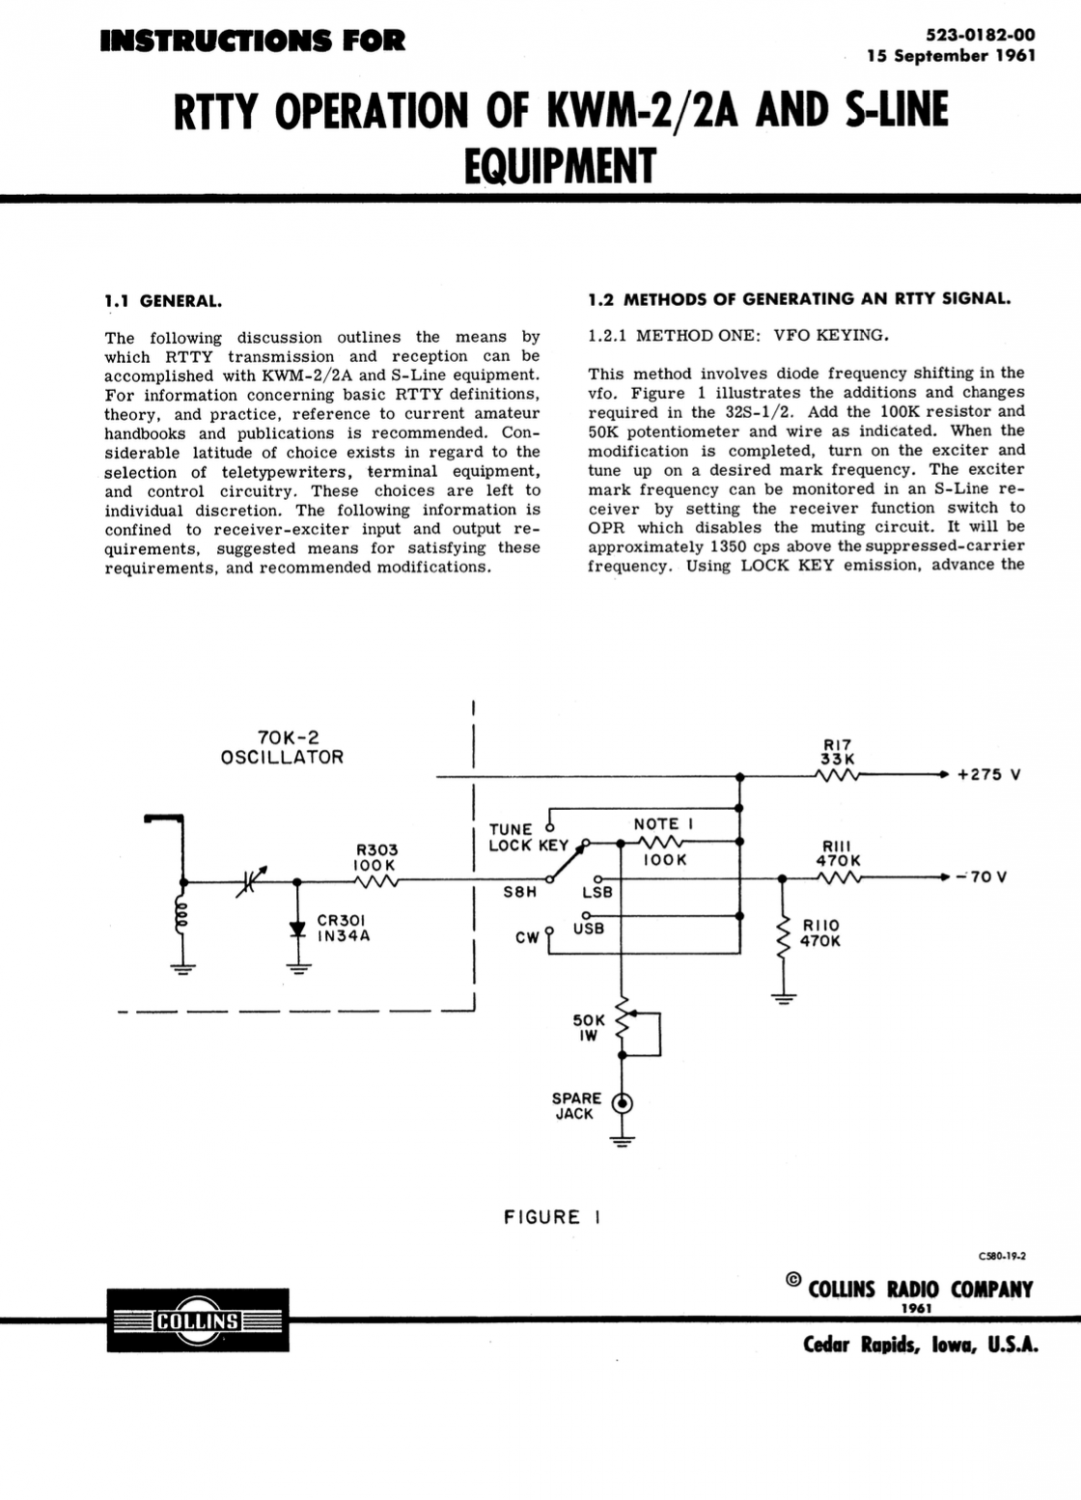 Collins KWM-2A Transceiver - Instructions for RTTY Operation - (1961-09)